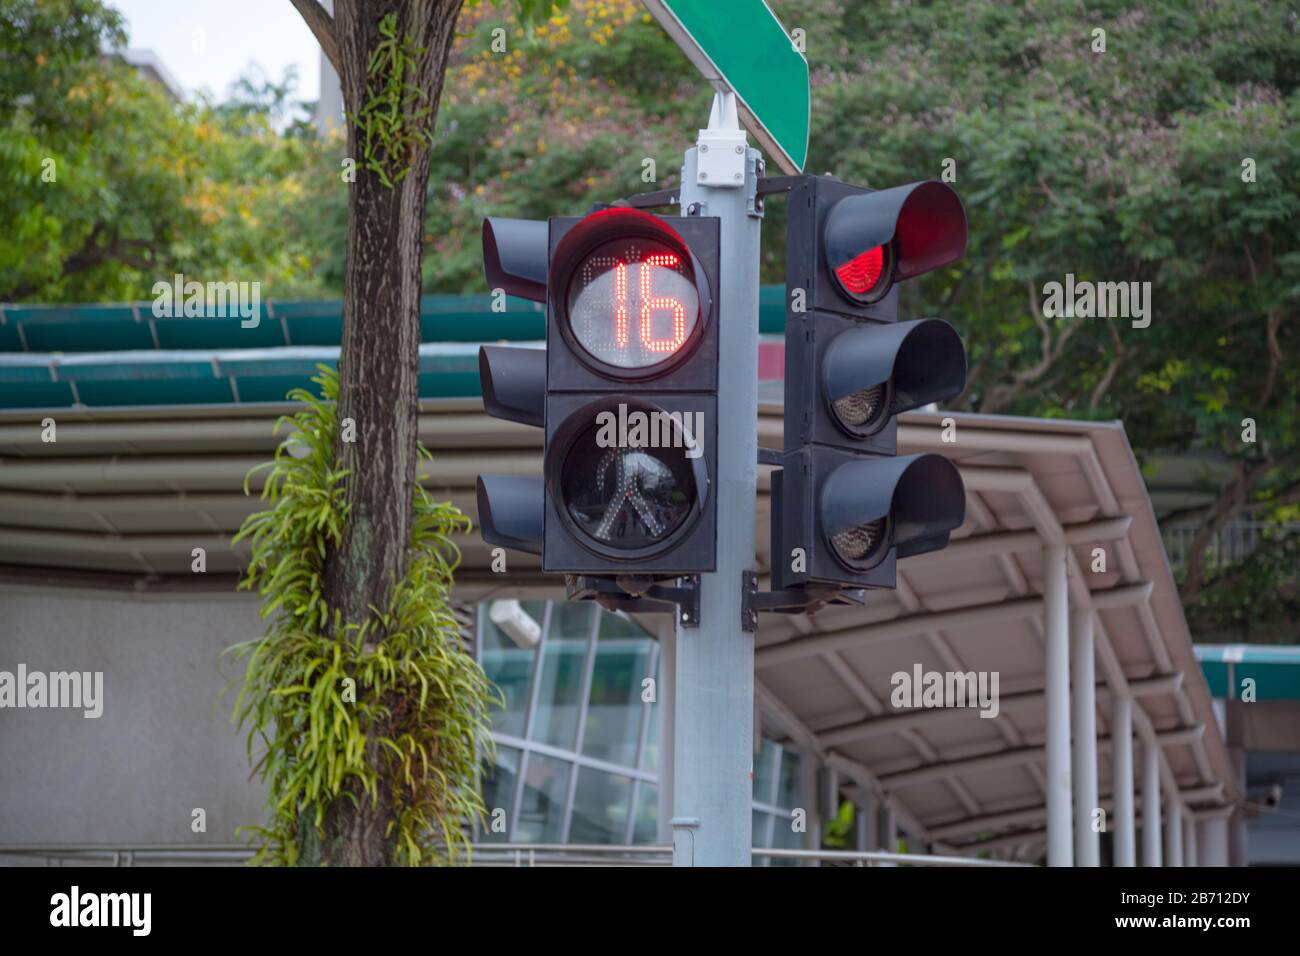 Pedestrian crossing traffic signal with timer and traffic lights at the intersection allow pedestrians and road traffic to use the crossing alternatel Stock Photo